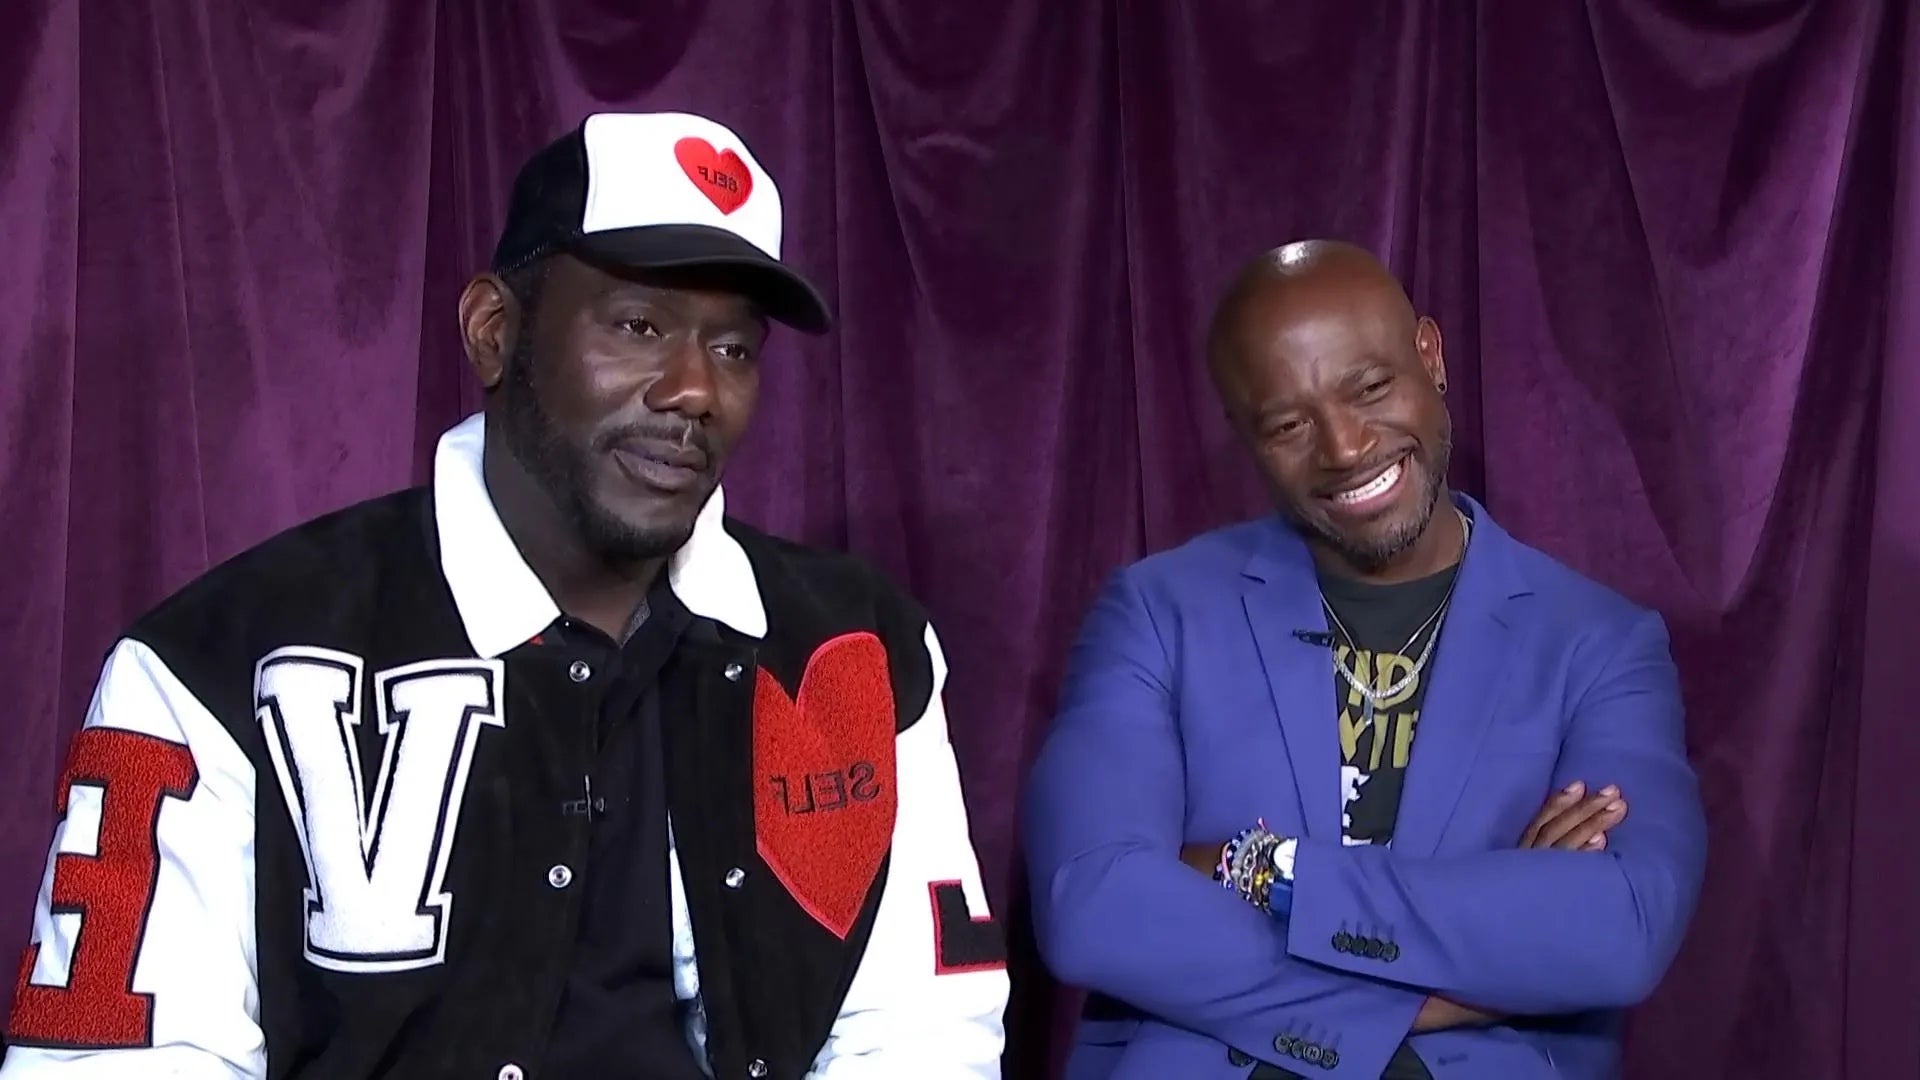 Taye Diggs And Nicco Annan On HIV Prevention For ViiV Healthcare’s ‘Me In You, You In Me’